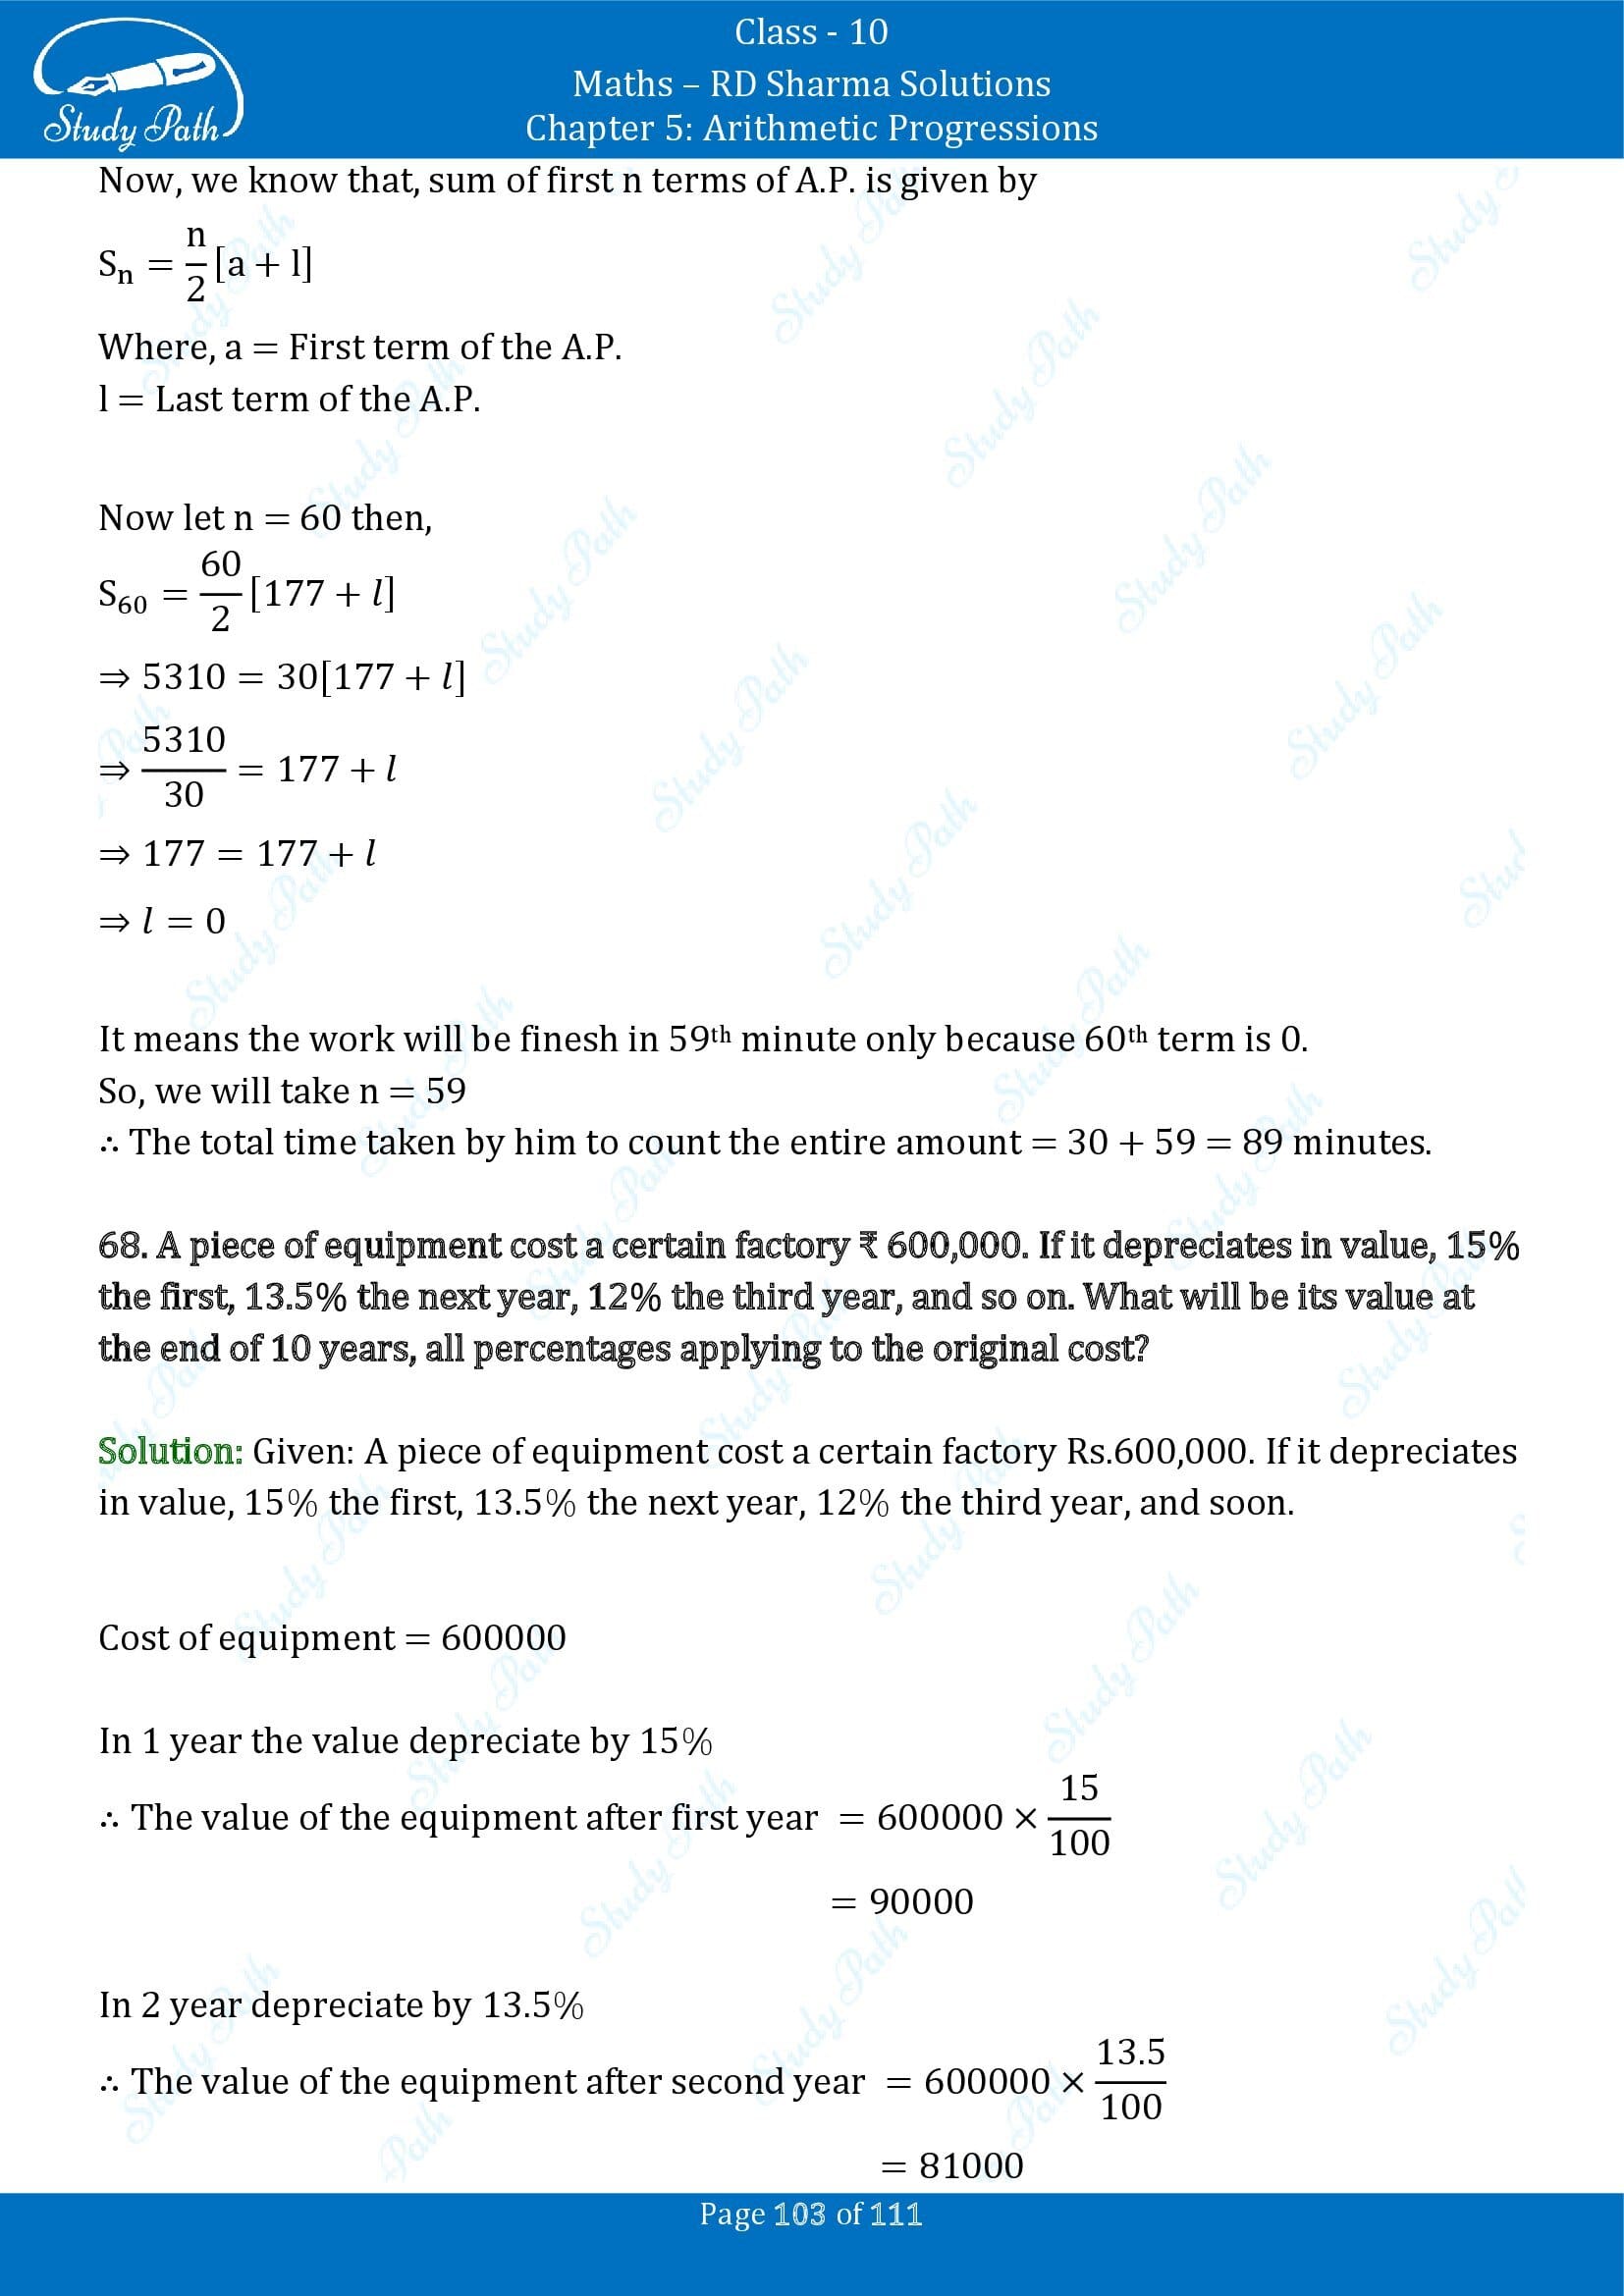 RD Sharma Solutions Class 10 Chapter 5 Arithmetic Progressions Exercise 5.6 00103